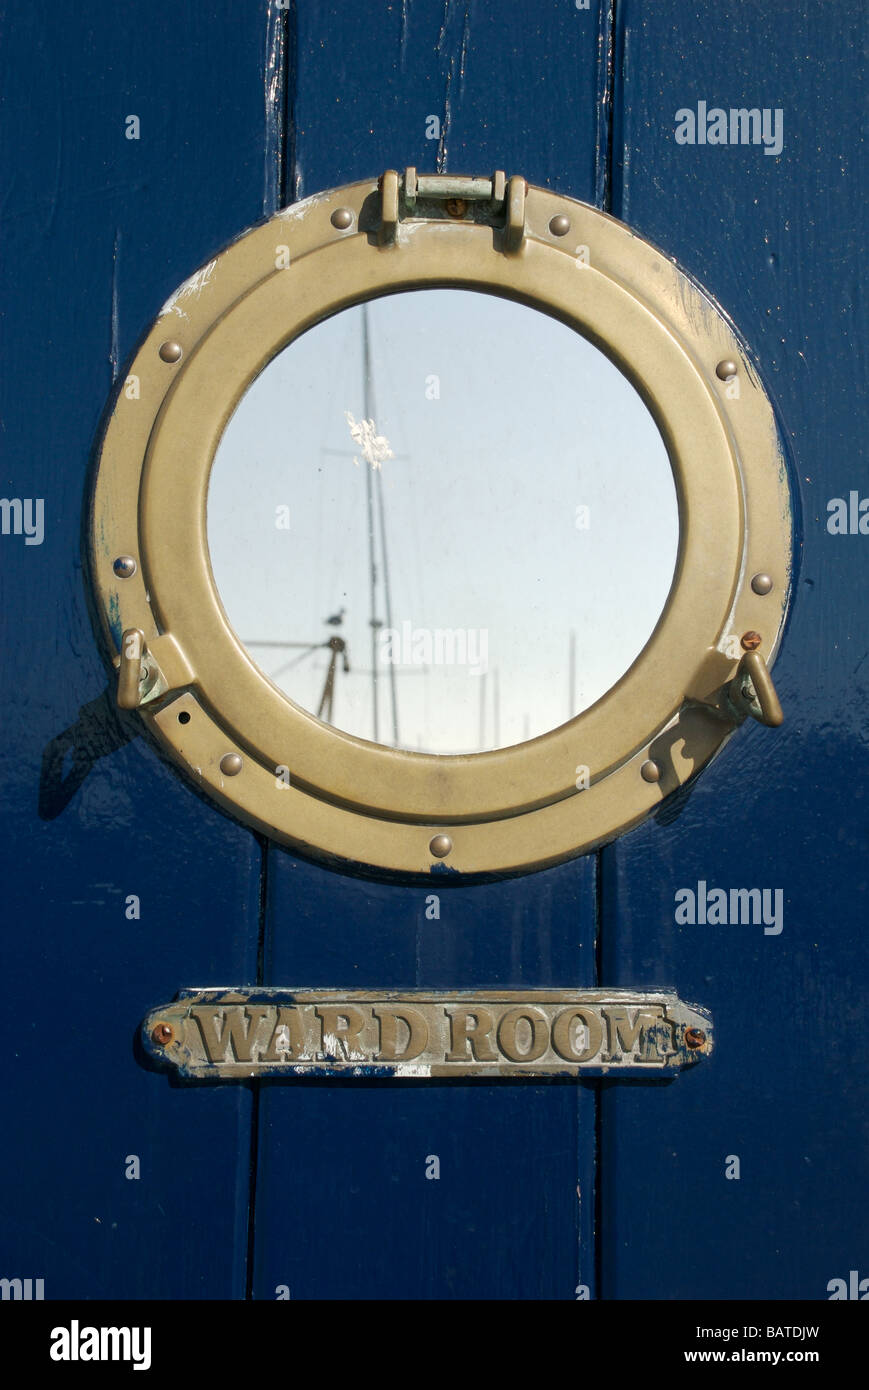 Porthole mirror and Ward Room sign on door, Barbican, Plymouth, Devon, UK Stock Photo